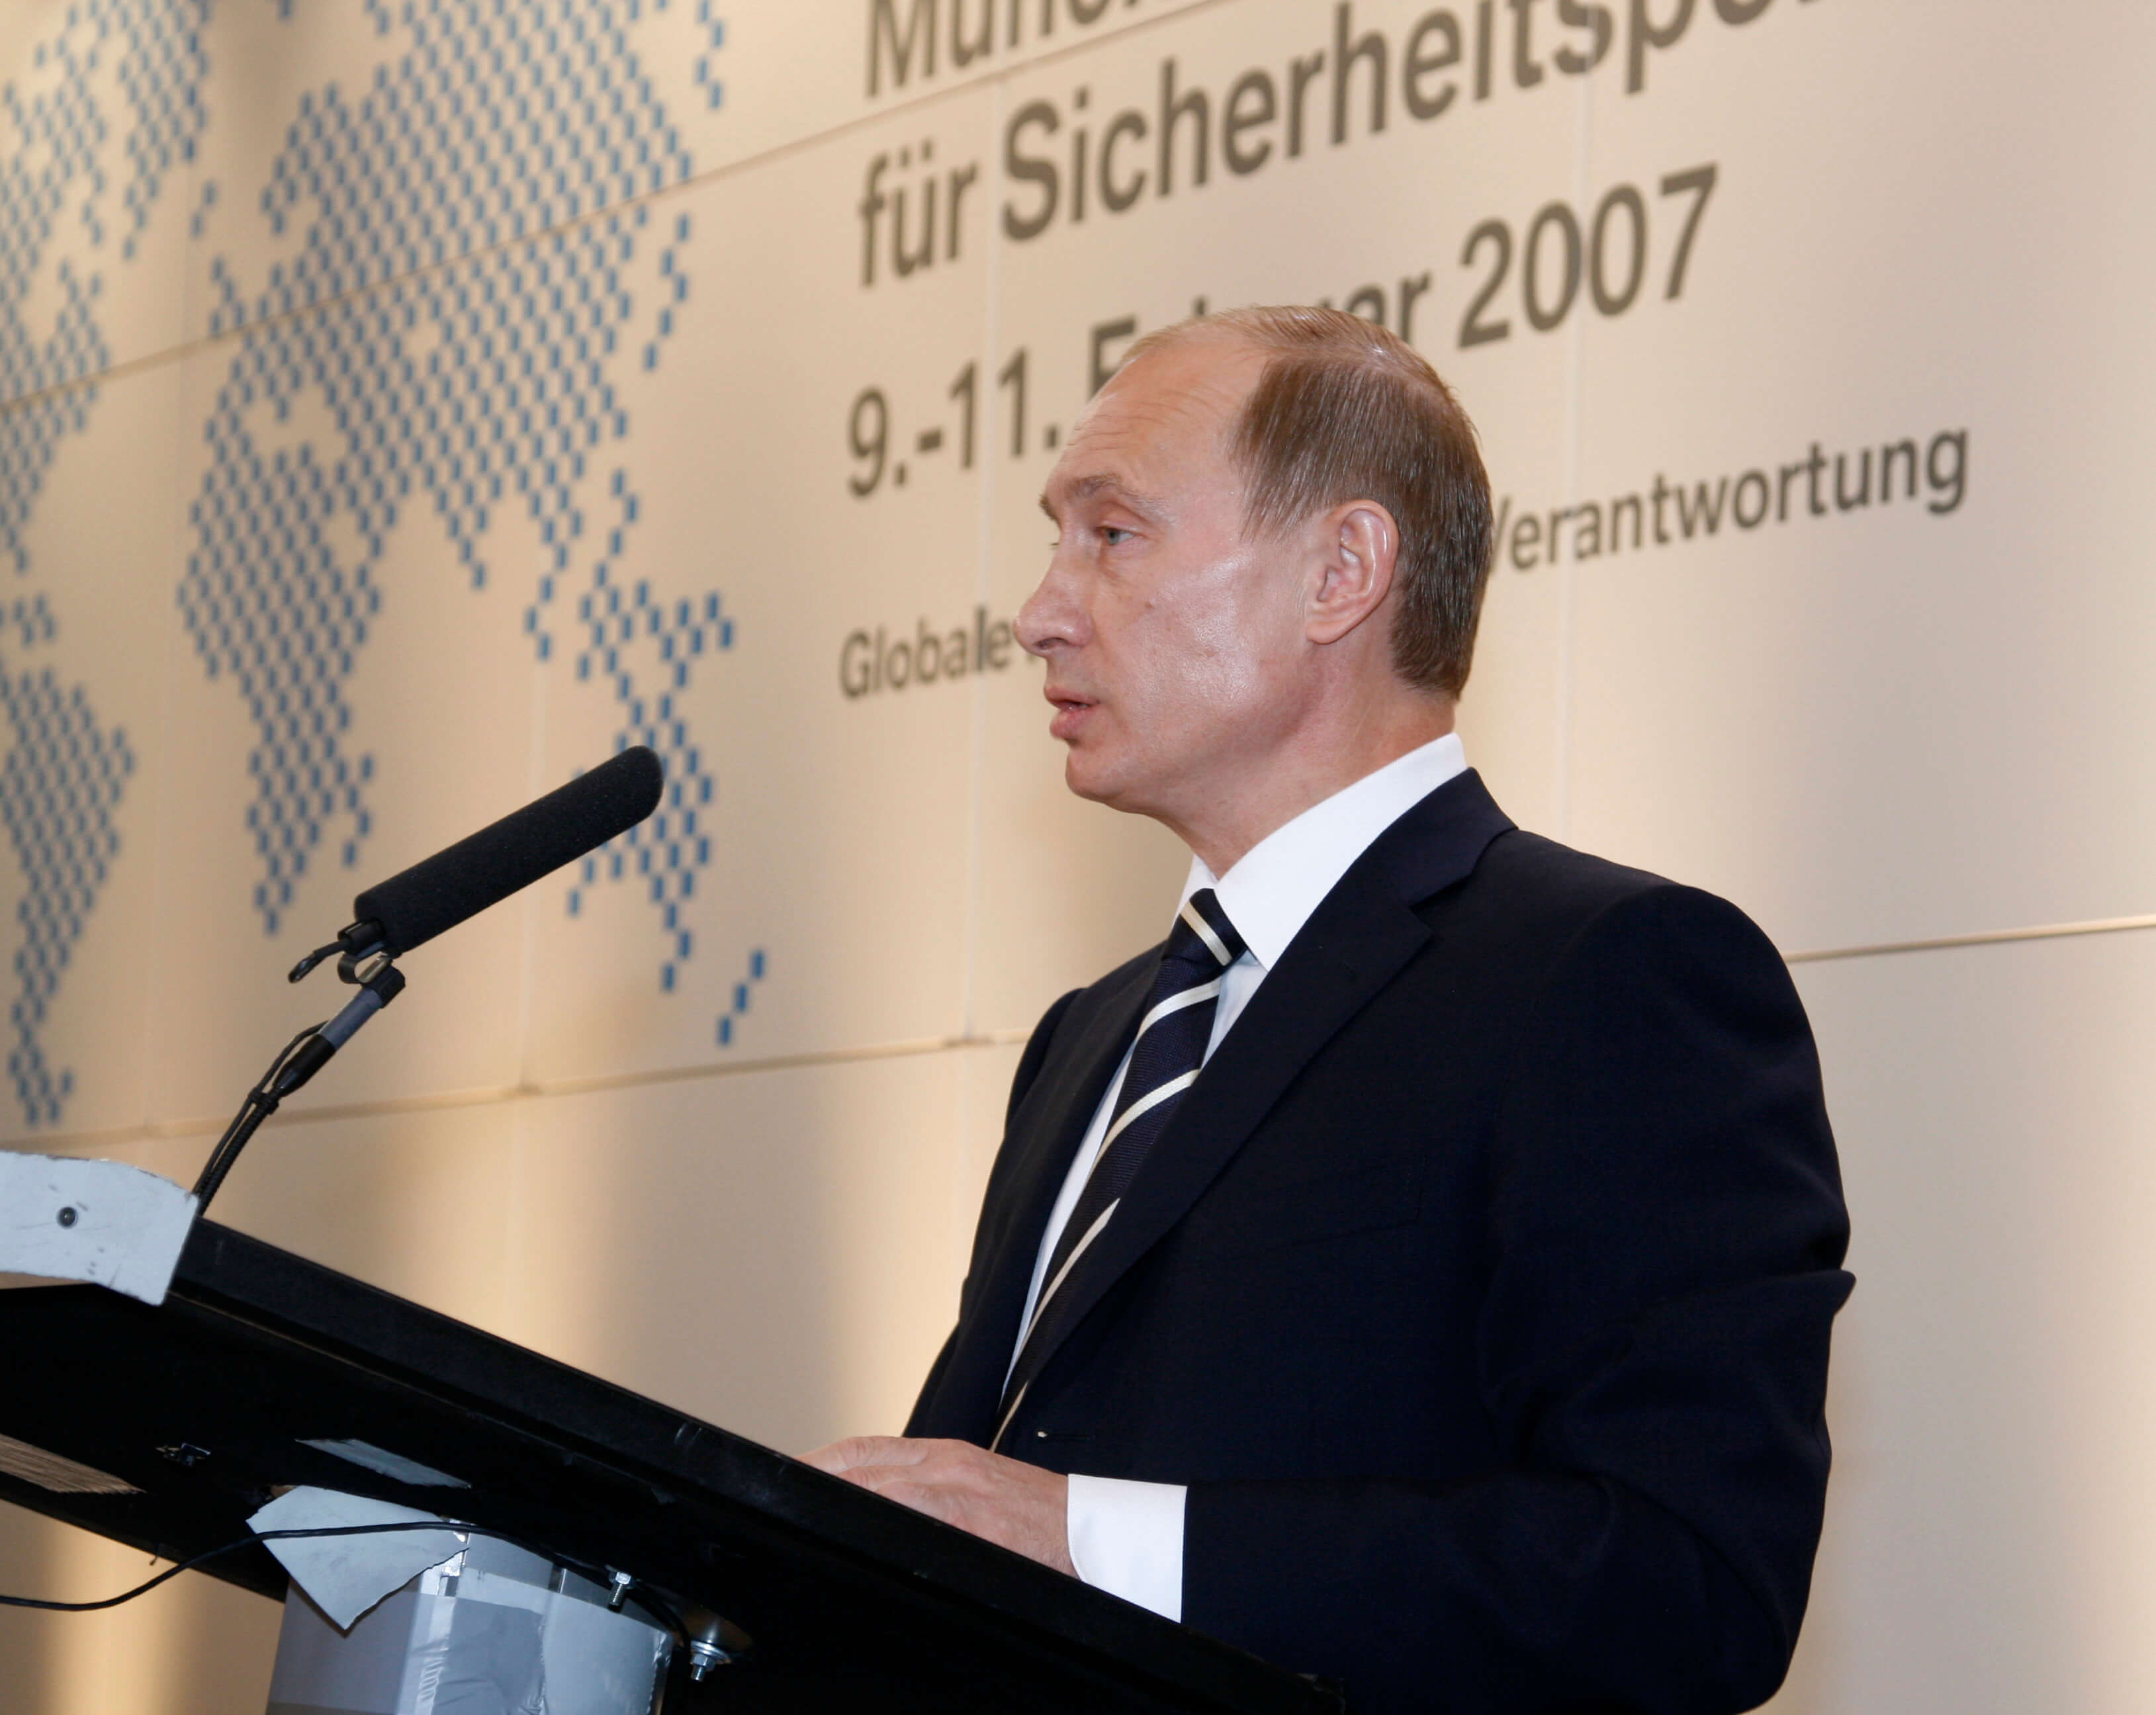 Russian President Vladimir Putin during his speeach at the 43rd Munich Security Conference in 2007. © Antje Wildgrube via Wikimediacommons